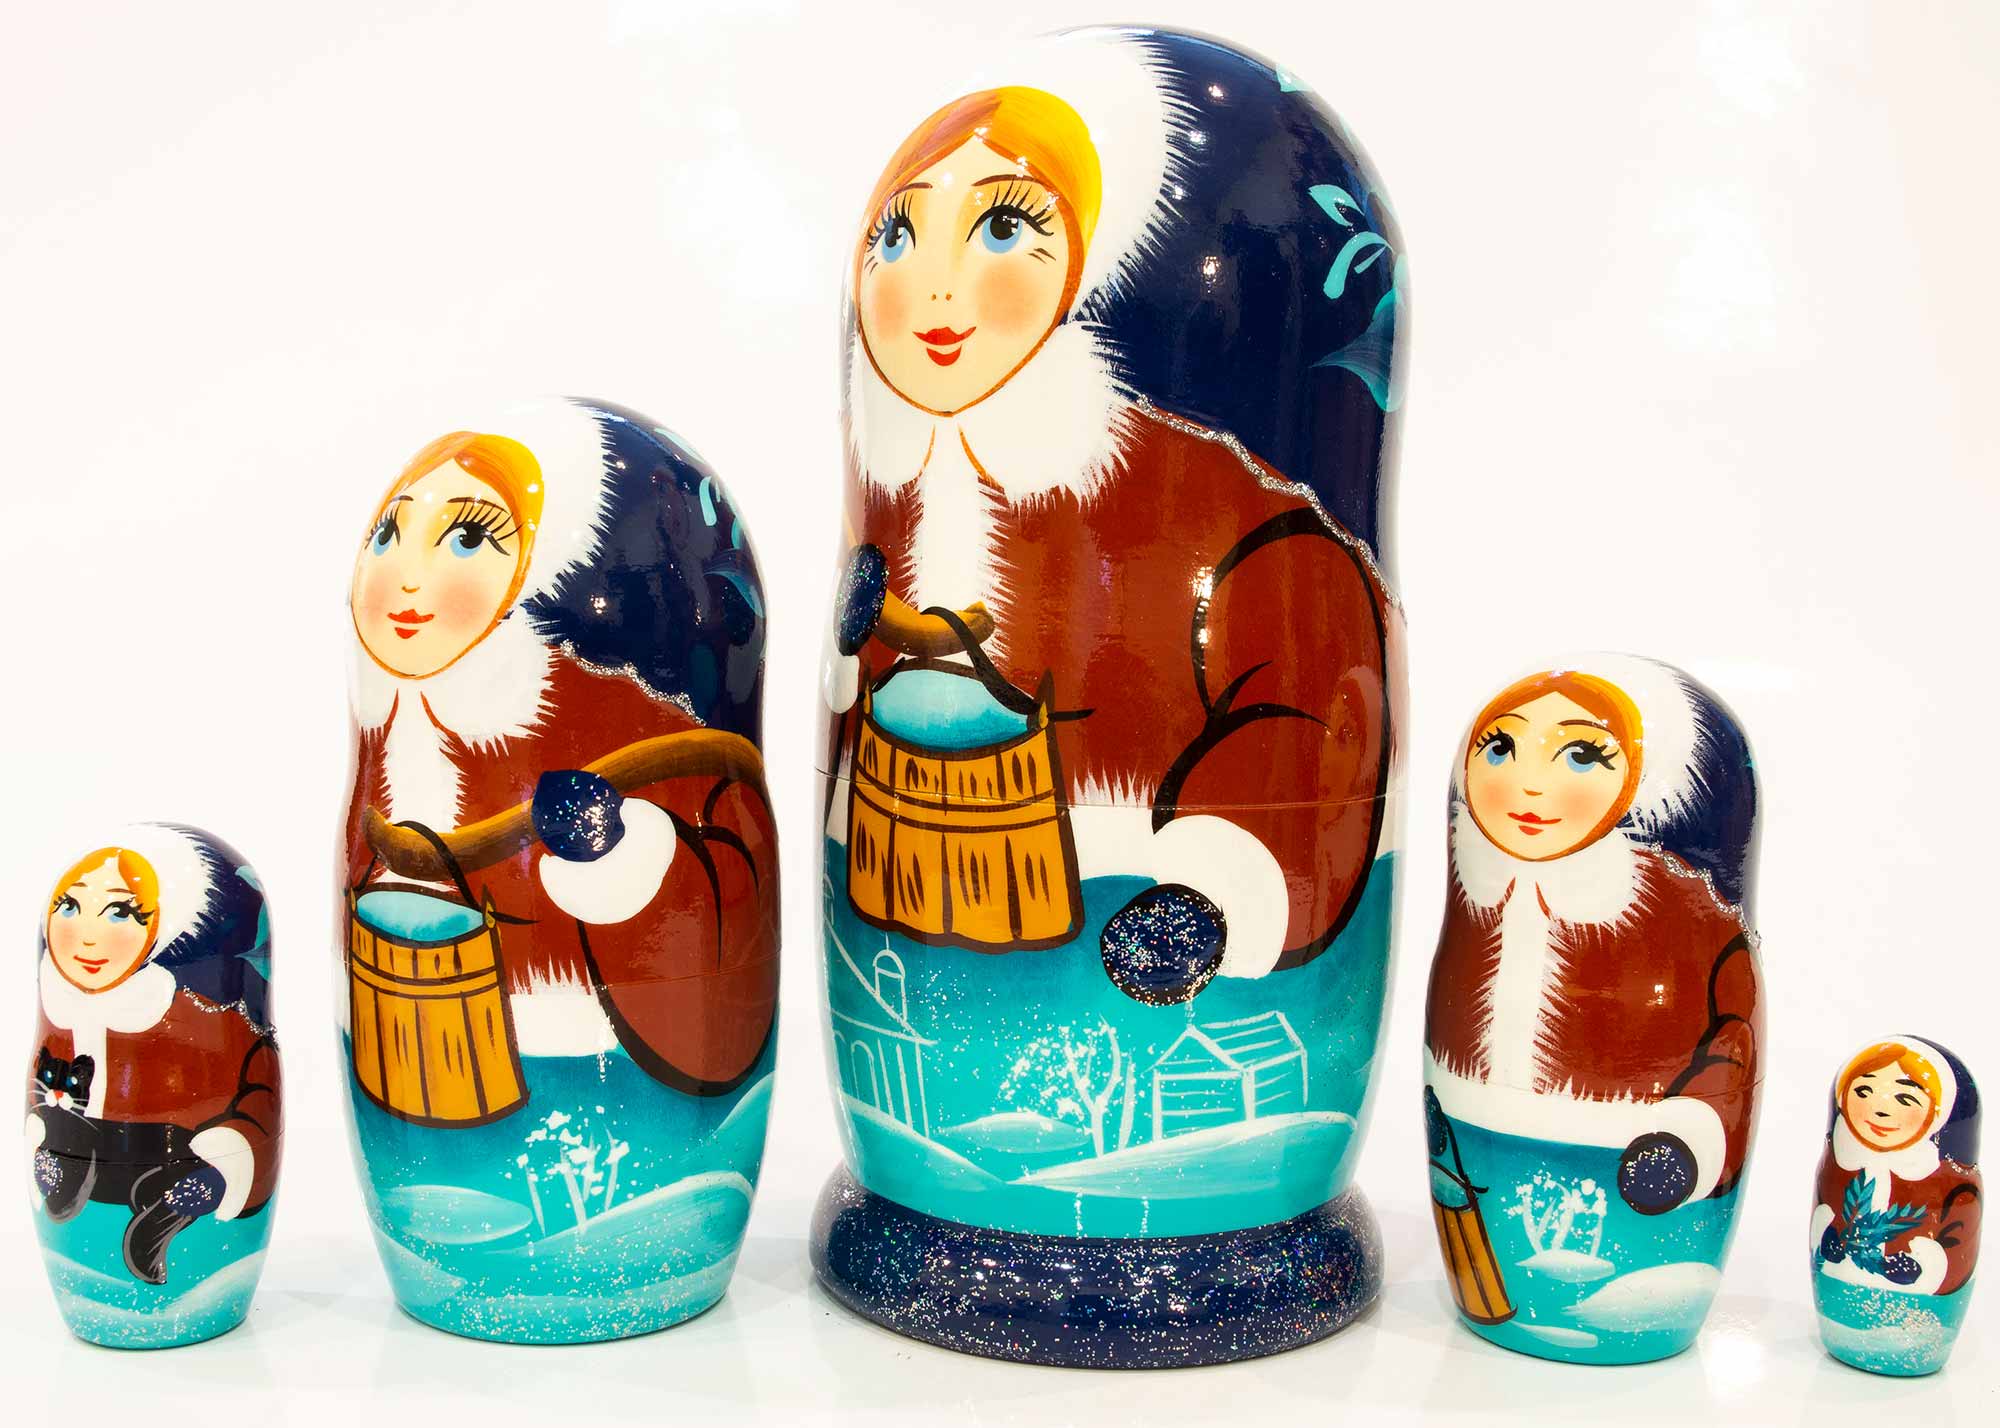 Buy Water Carrier Classical Nesting Doll 5pc./6" at GoldenCockerel.com